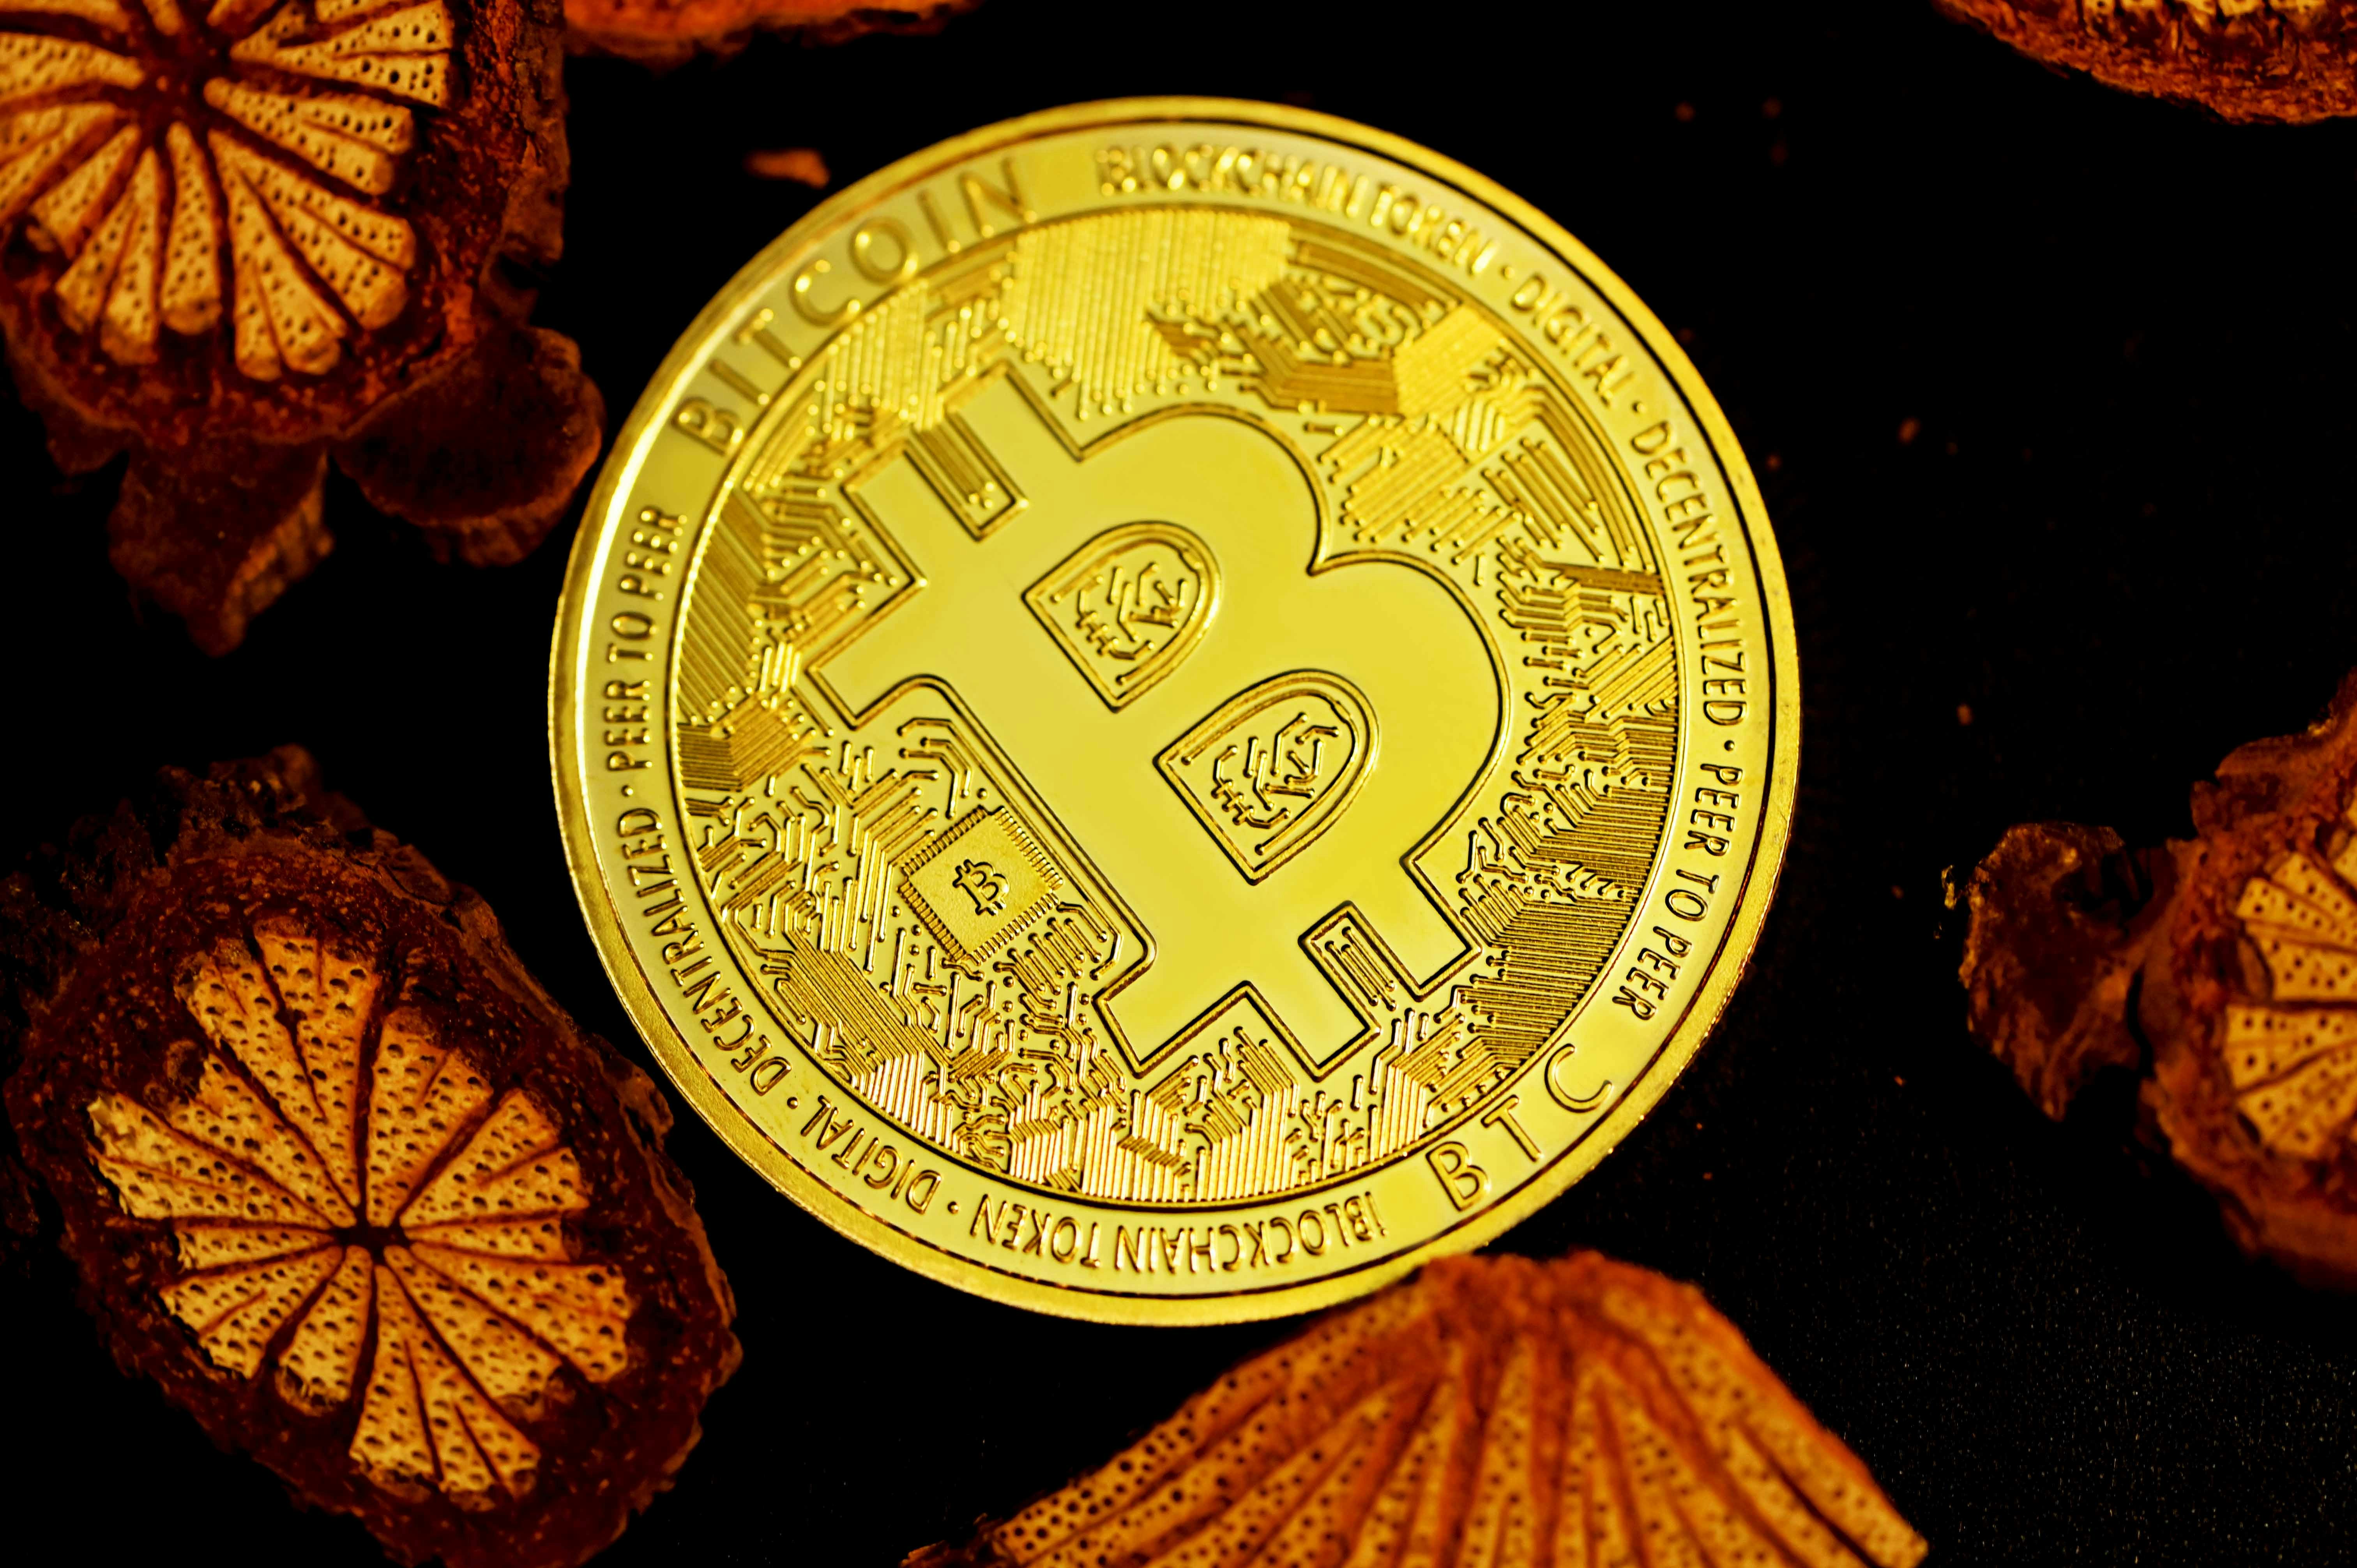 A bitcoin surrounded by wood decorations